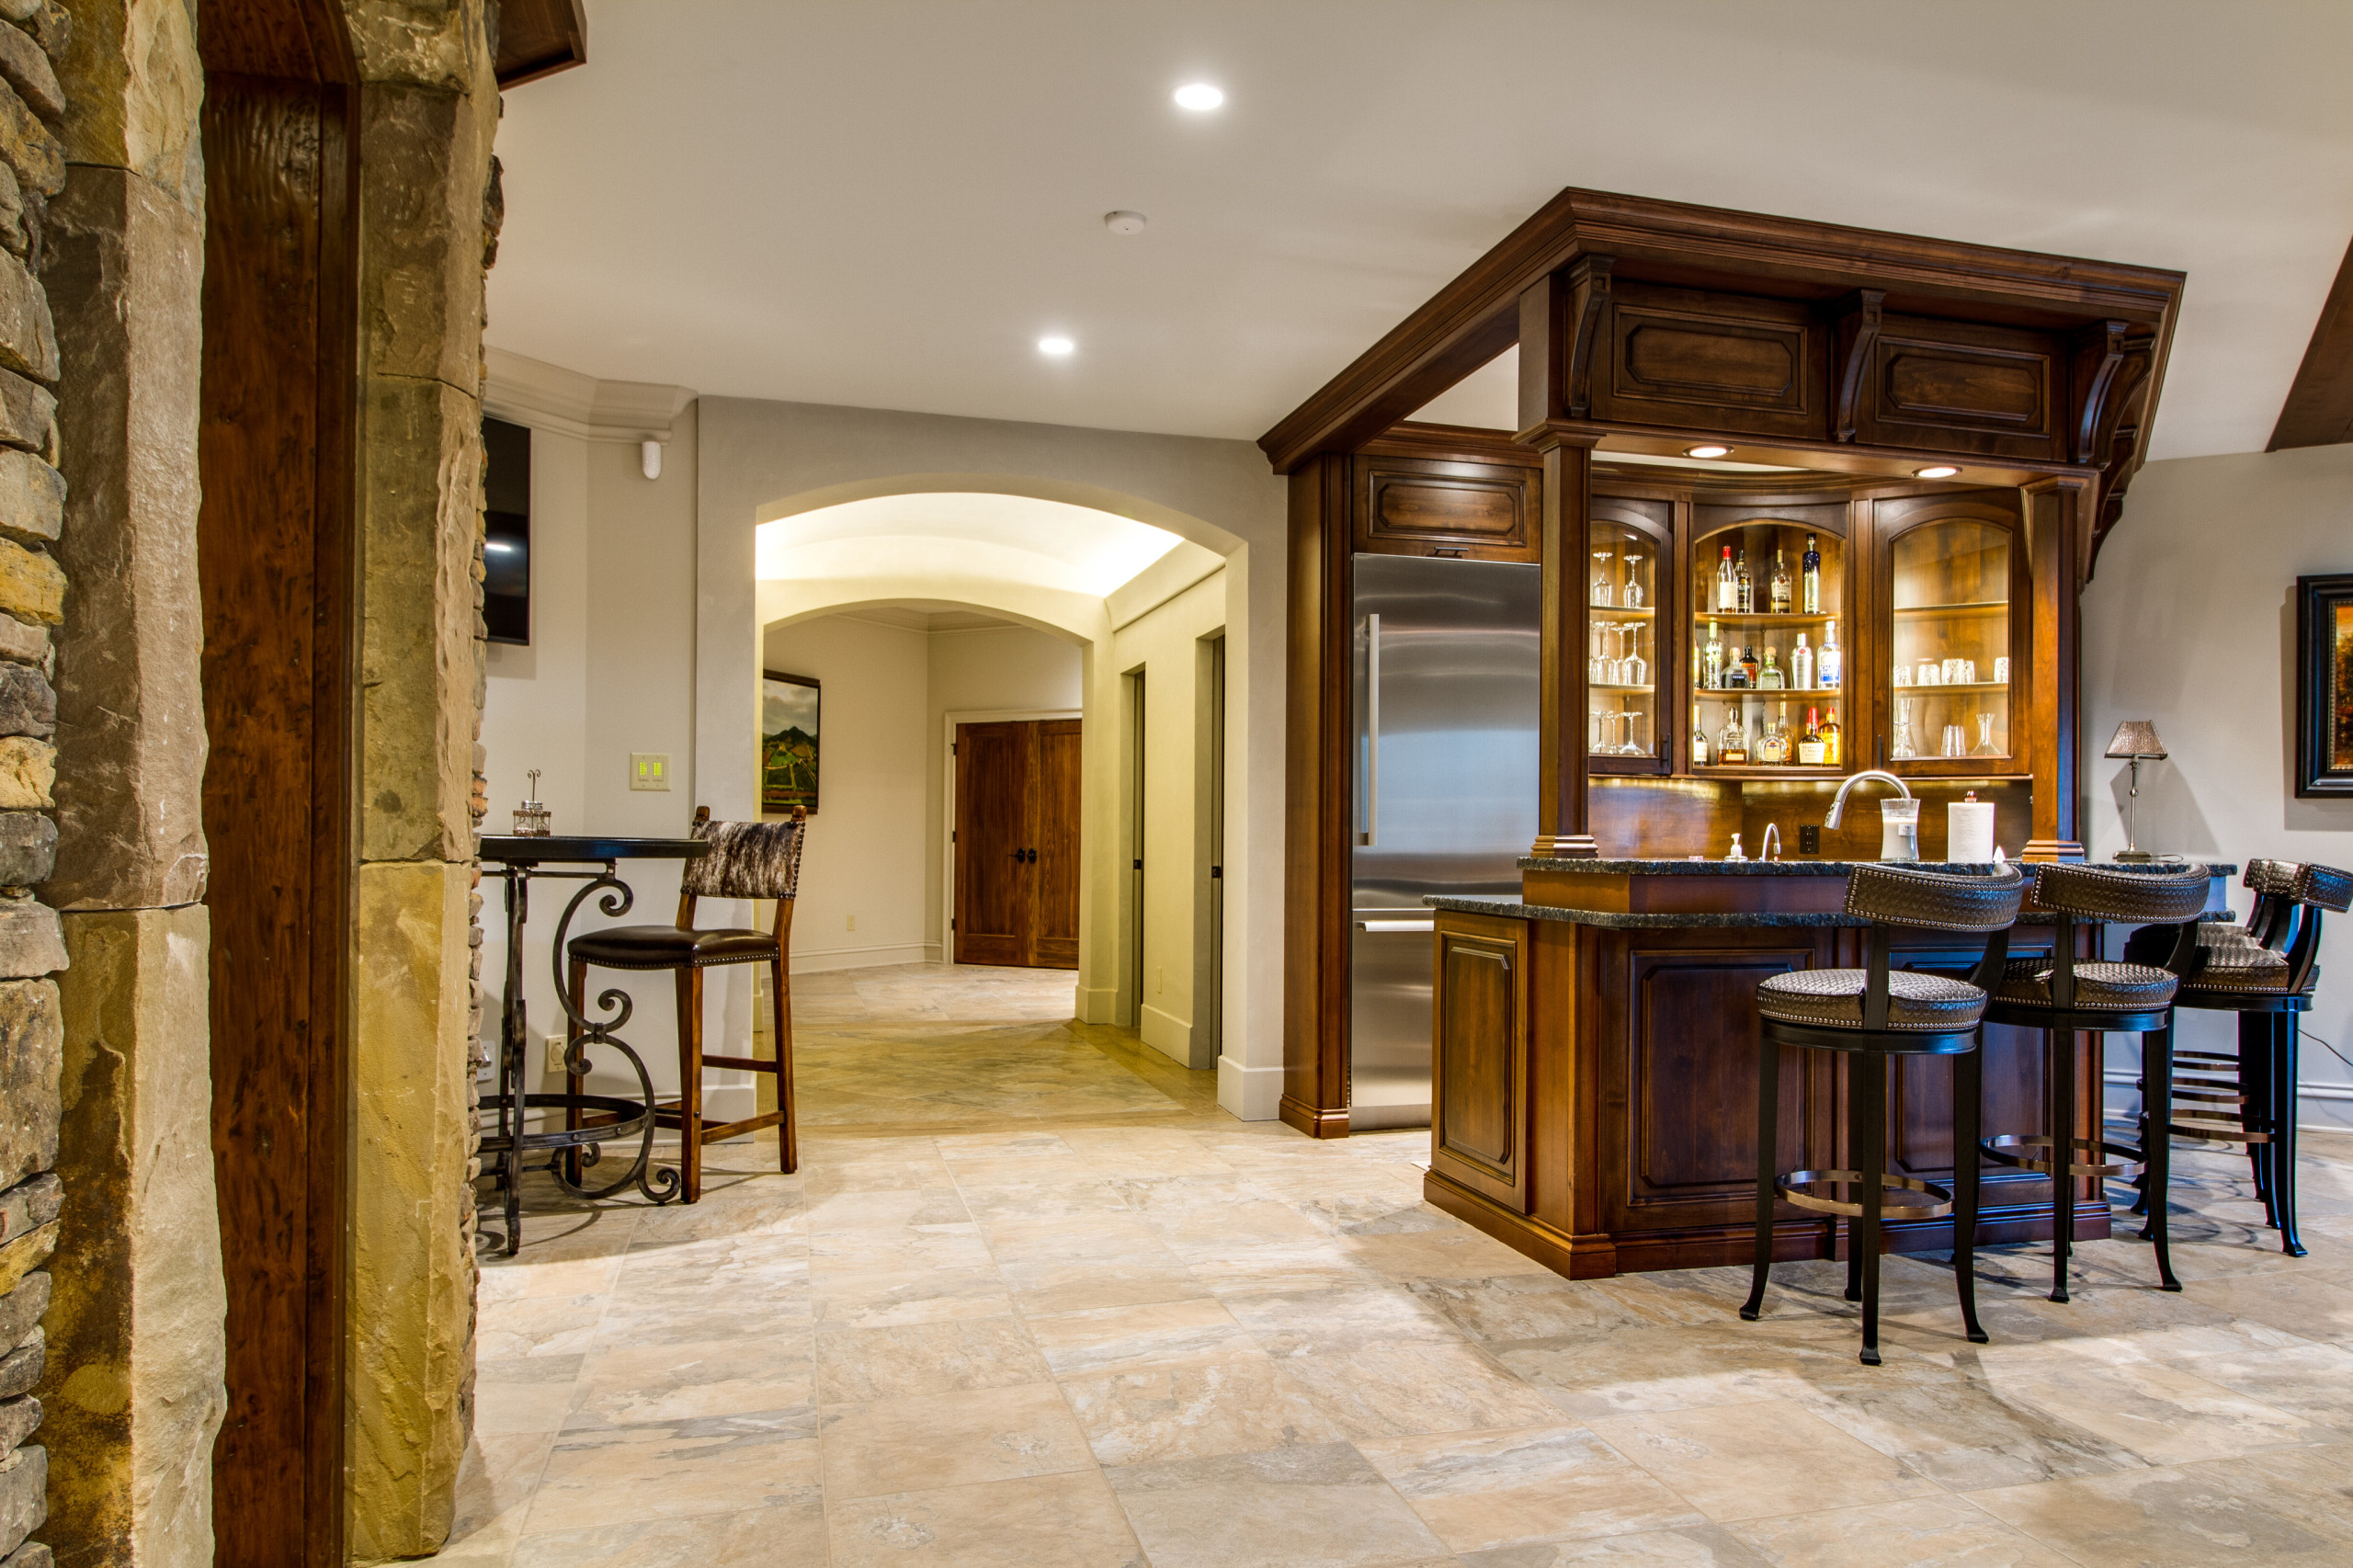 Home bar alder wood cabinetry matches the Wine Cellar